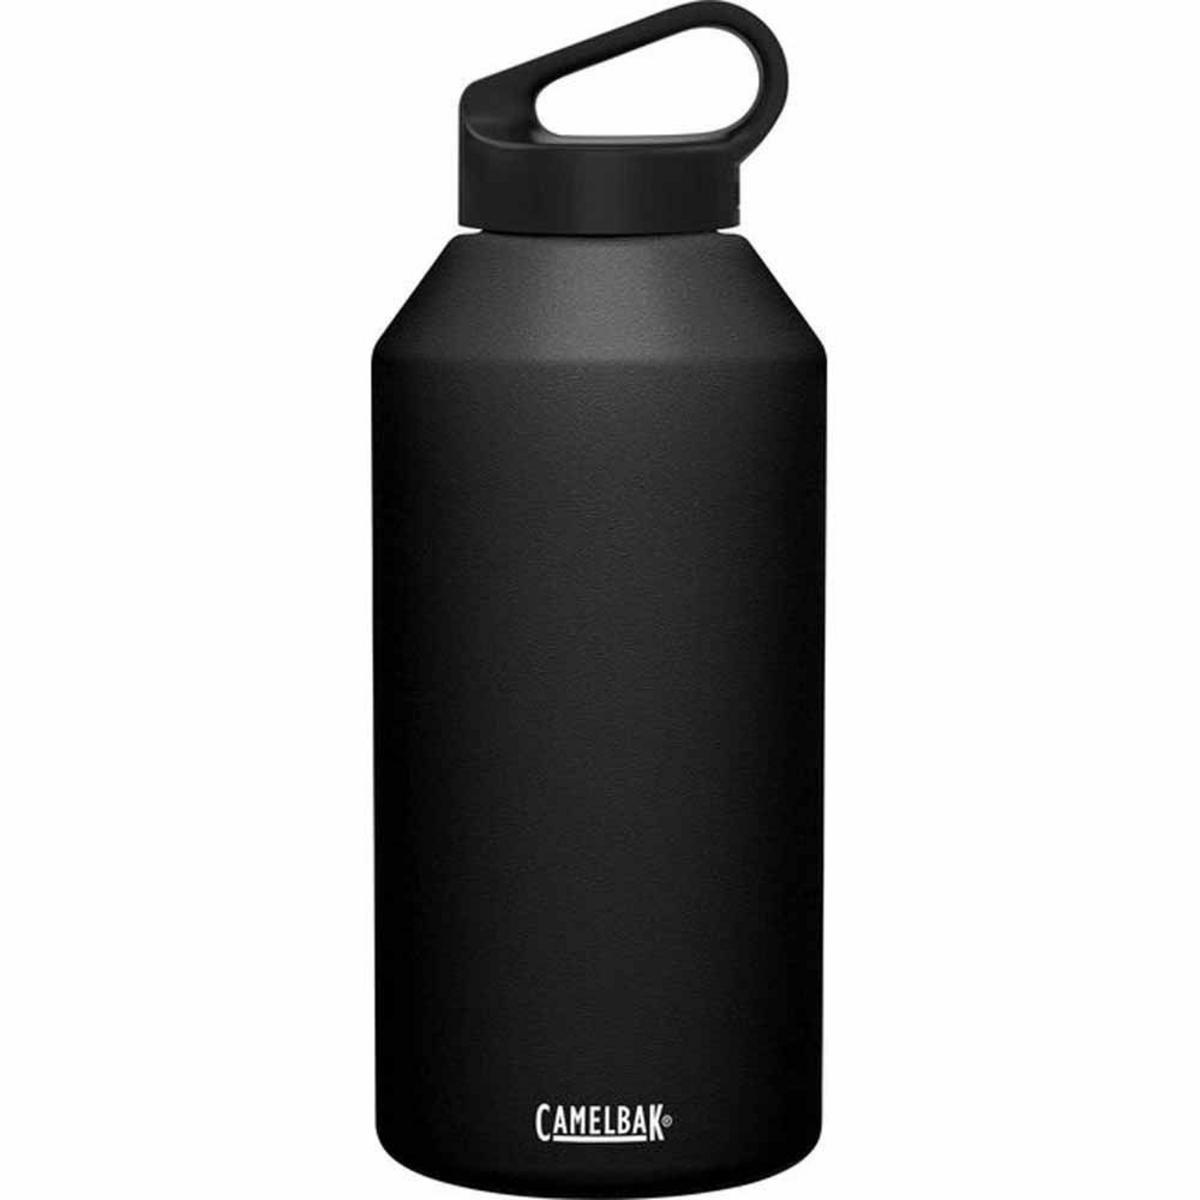 Camelbak Carry Cap 64 oz Vacuum Insulated Stainless Steel Water Bottle